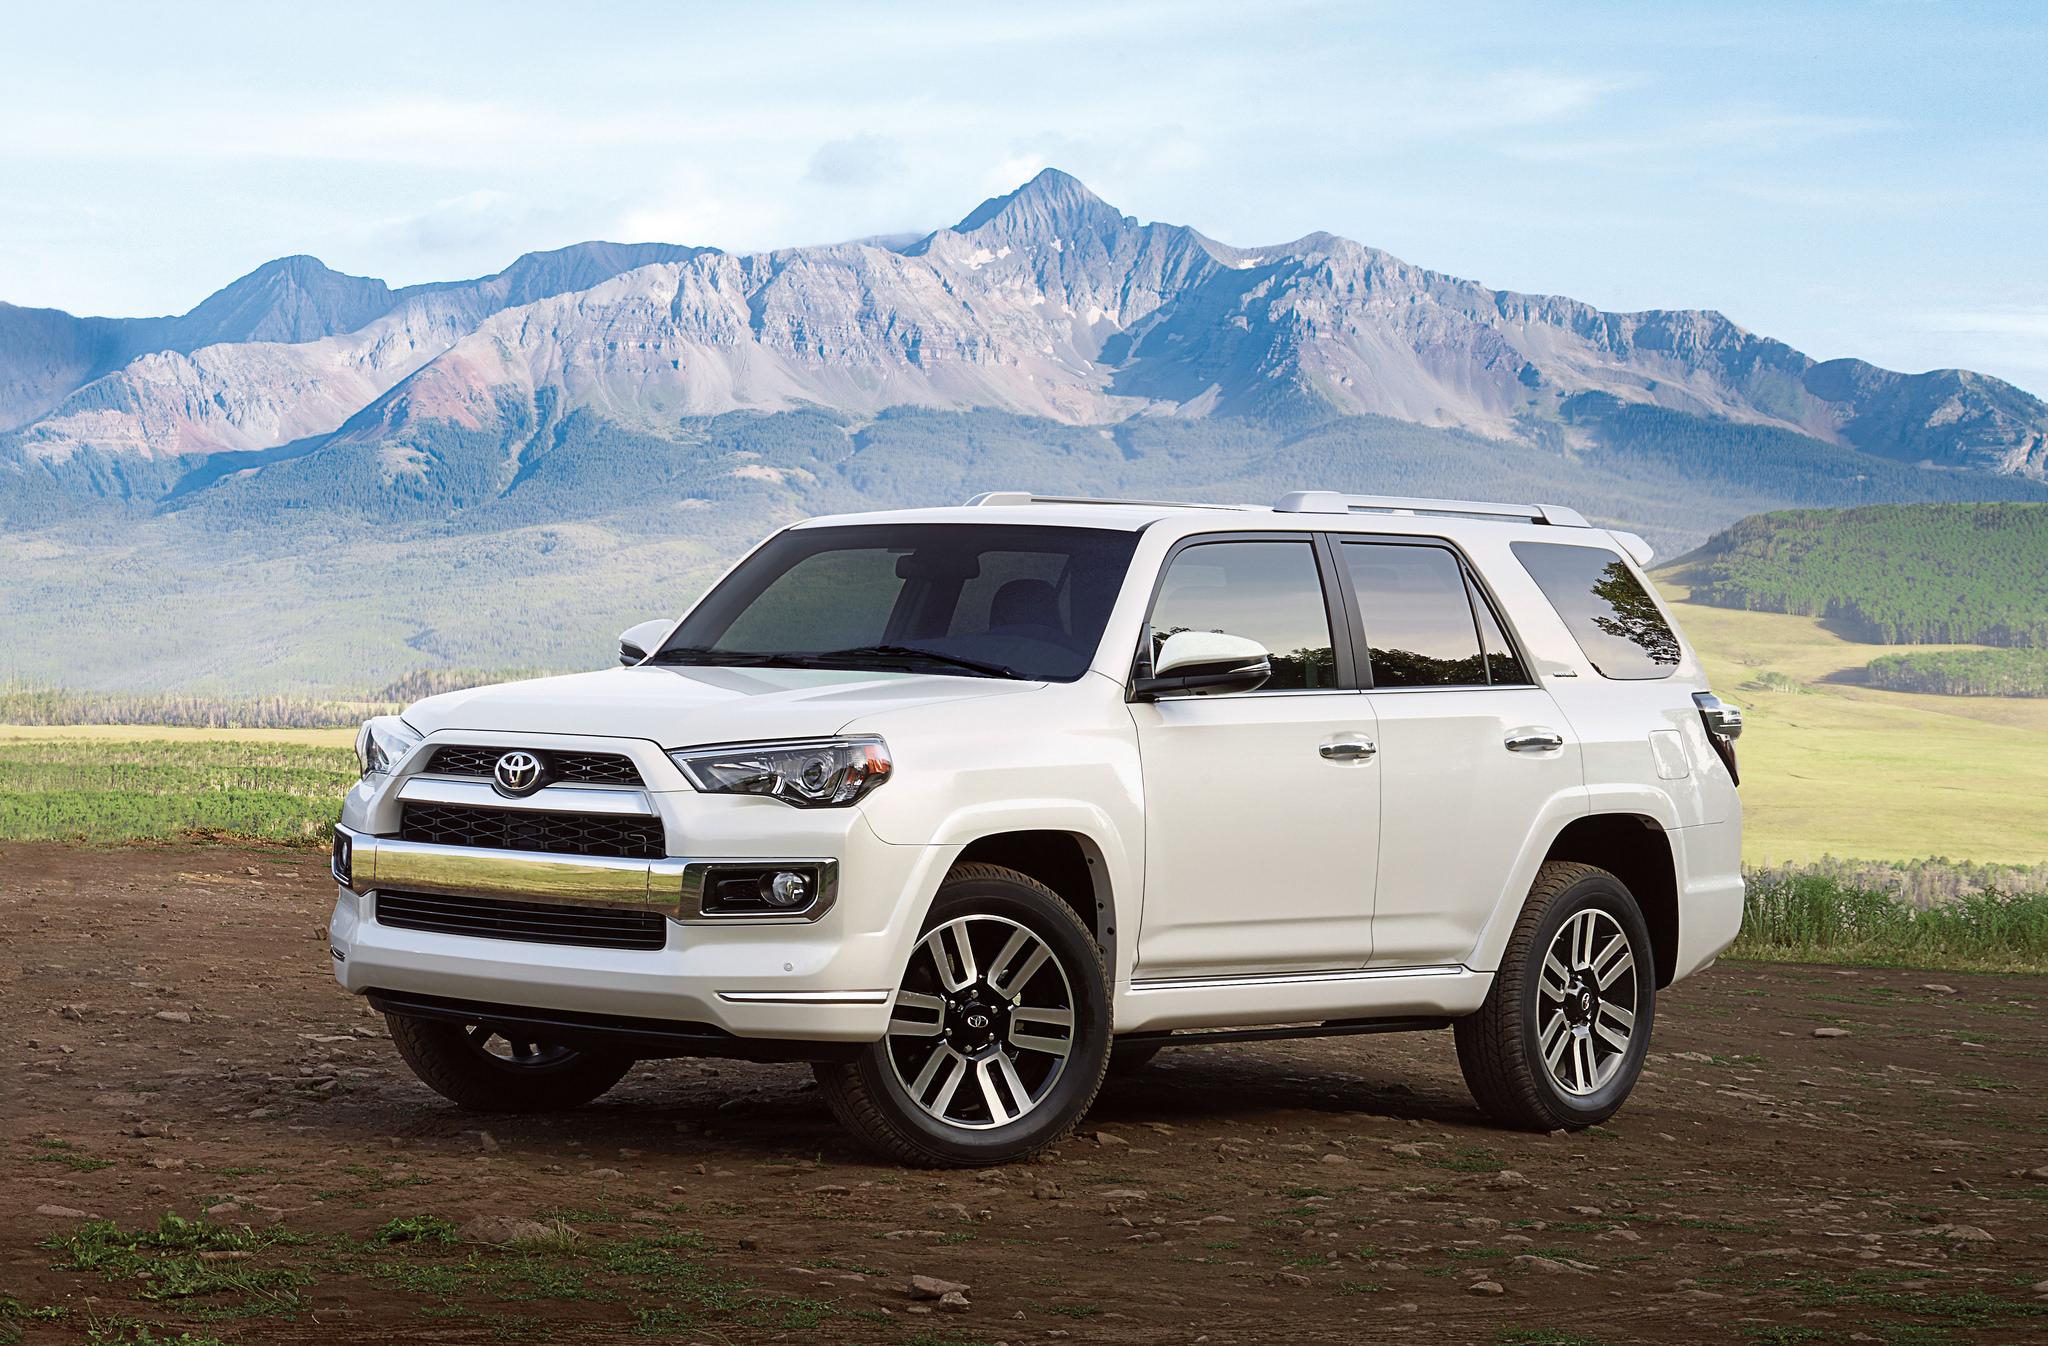 Toyota 4Runner wallpapers, Vehicles, HQ Toyota 4Runner pictures 4K